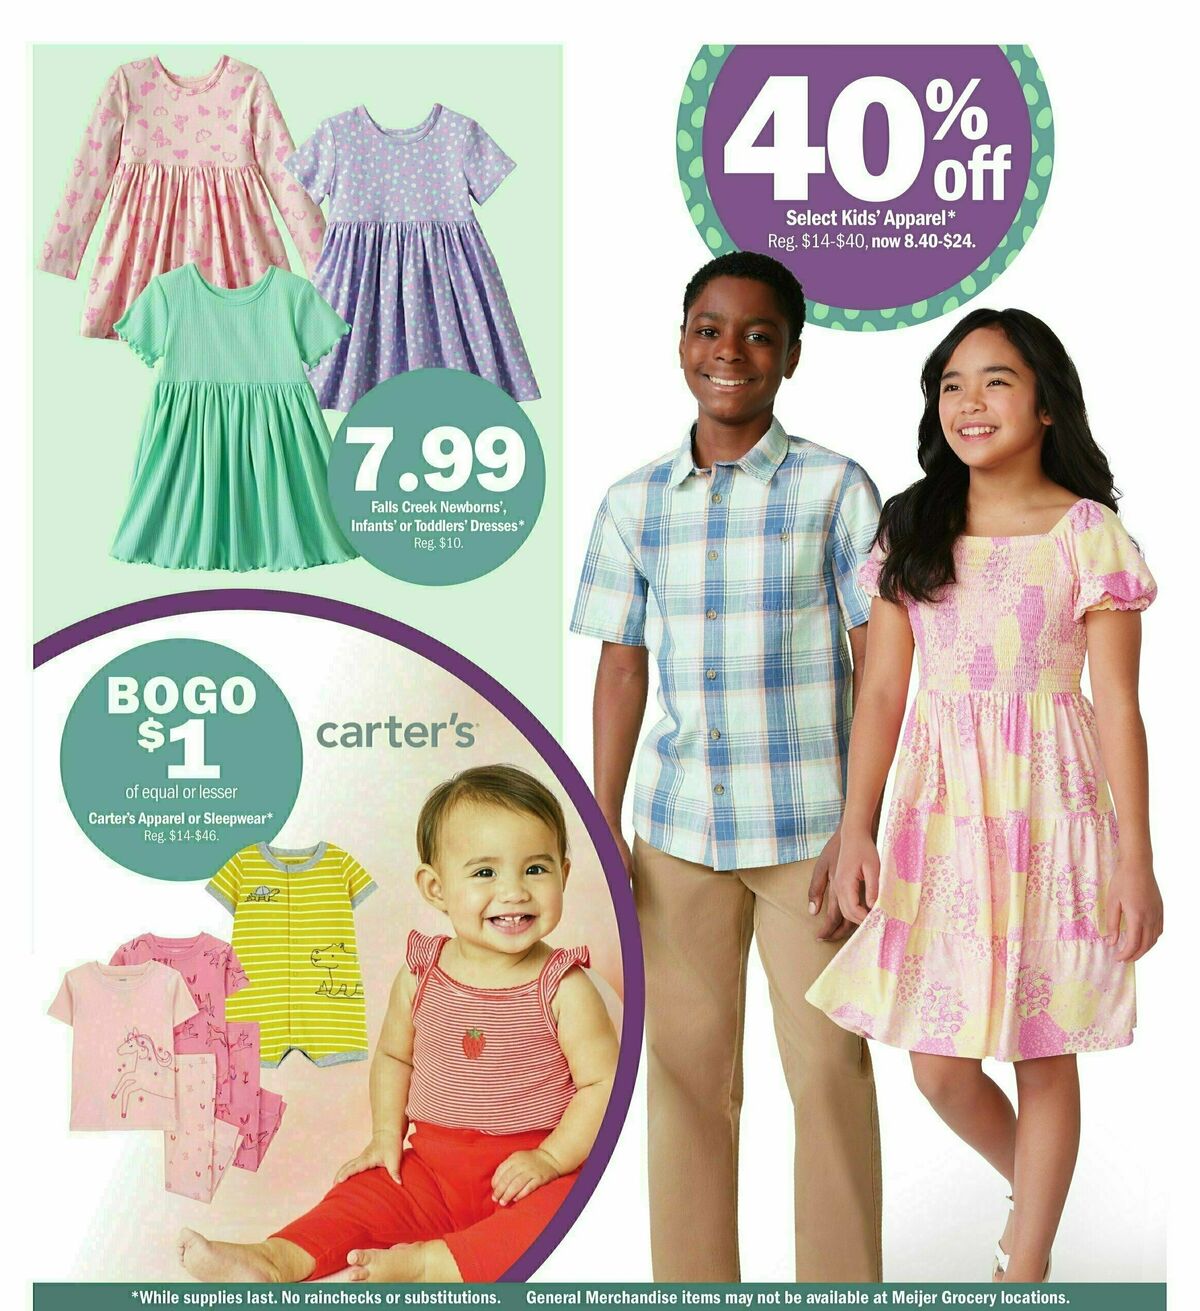 Meijer Easter Ad Weekly Ad from March 24